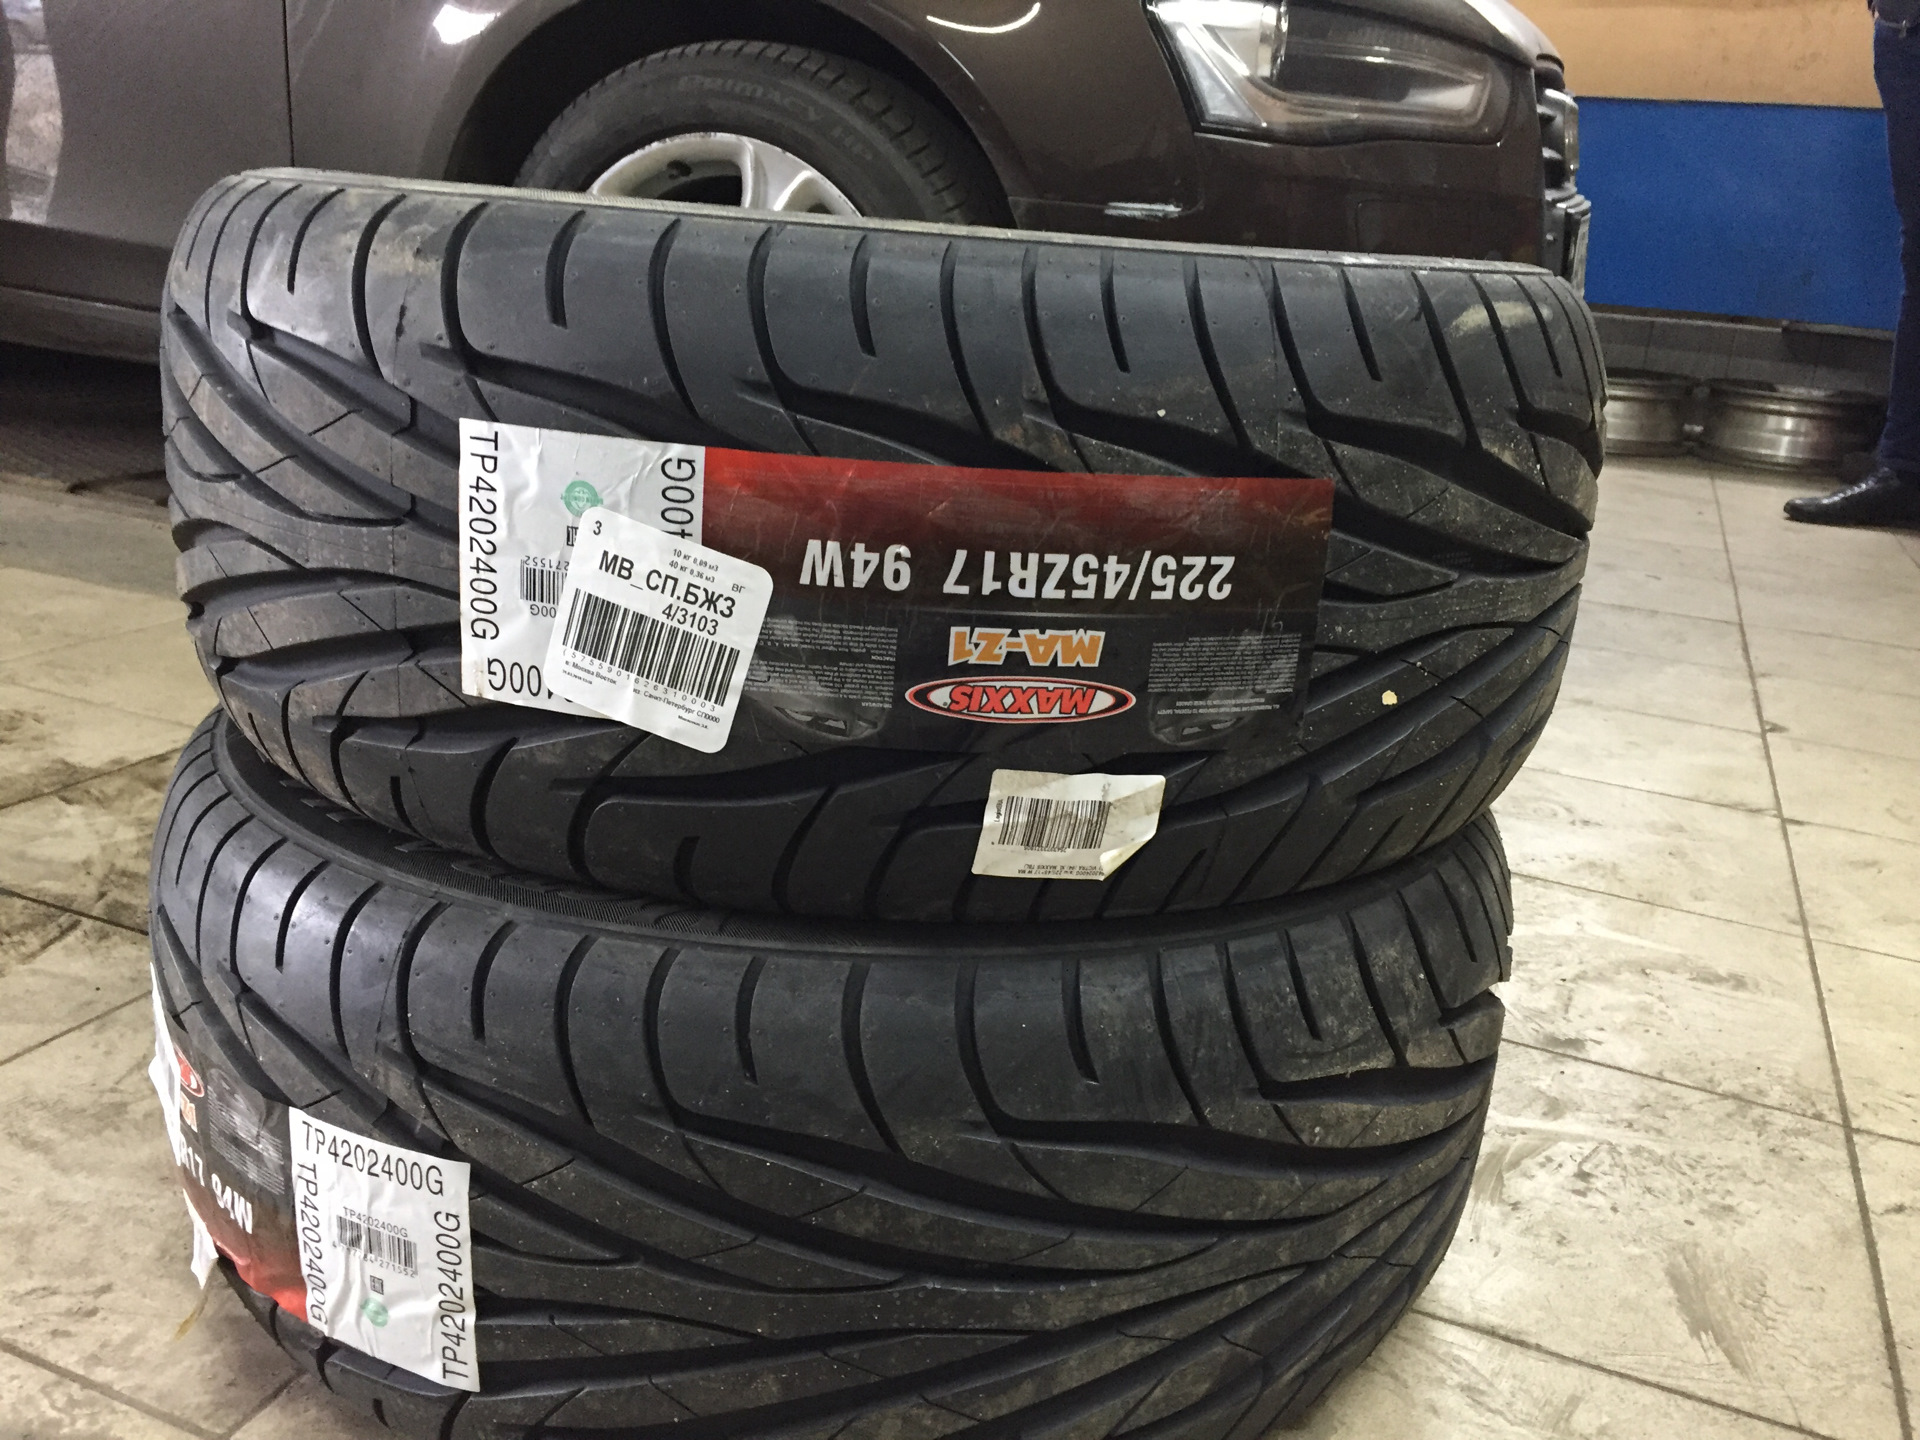 Шины максис виктра. 225/45r17 Maxxis Victra ma-z1 94w. Maxxis ma-z1 XL. 225/45r17 94w Maxxis ma-z1 Victra (XL). Maxxis ma-z1 Victra.